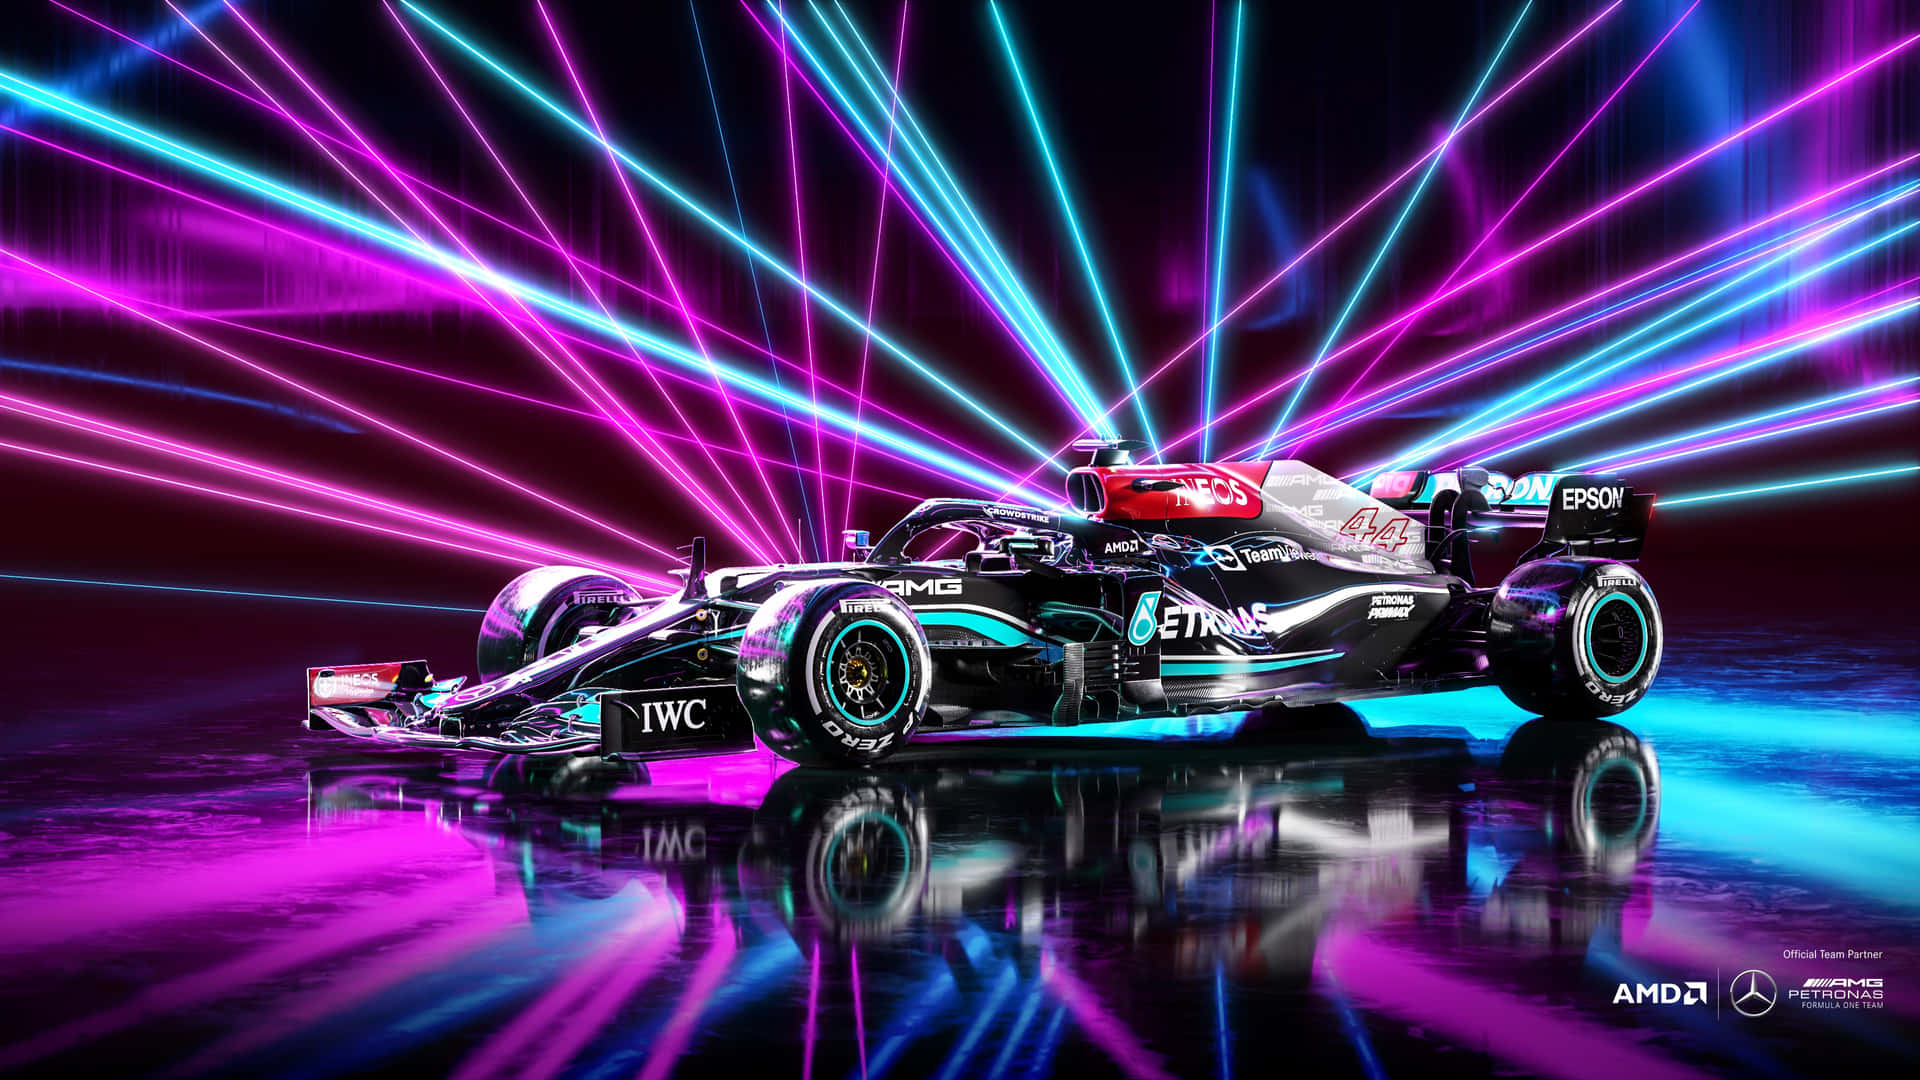 A Mercedes F1 Car With Neon Lights In The Background Wallpaper